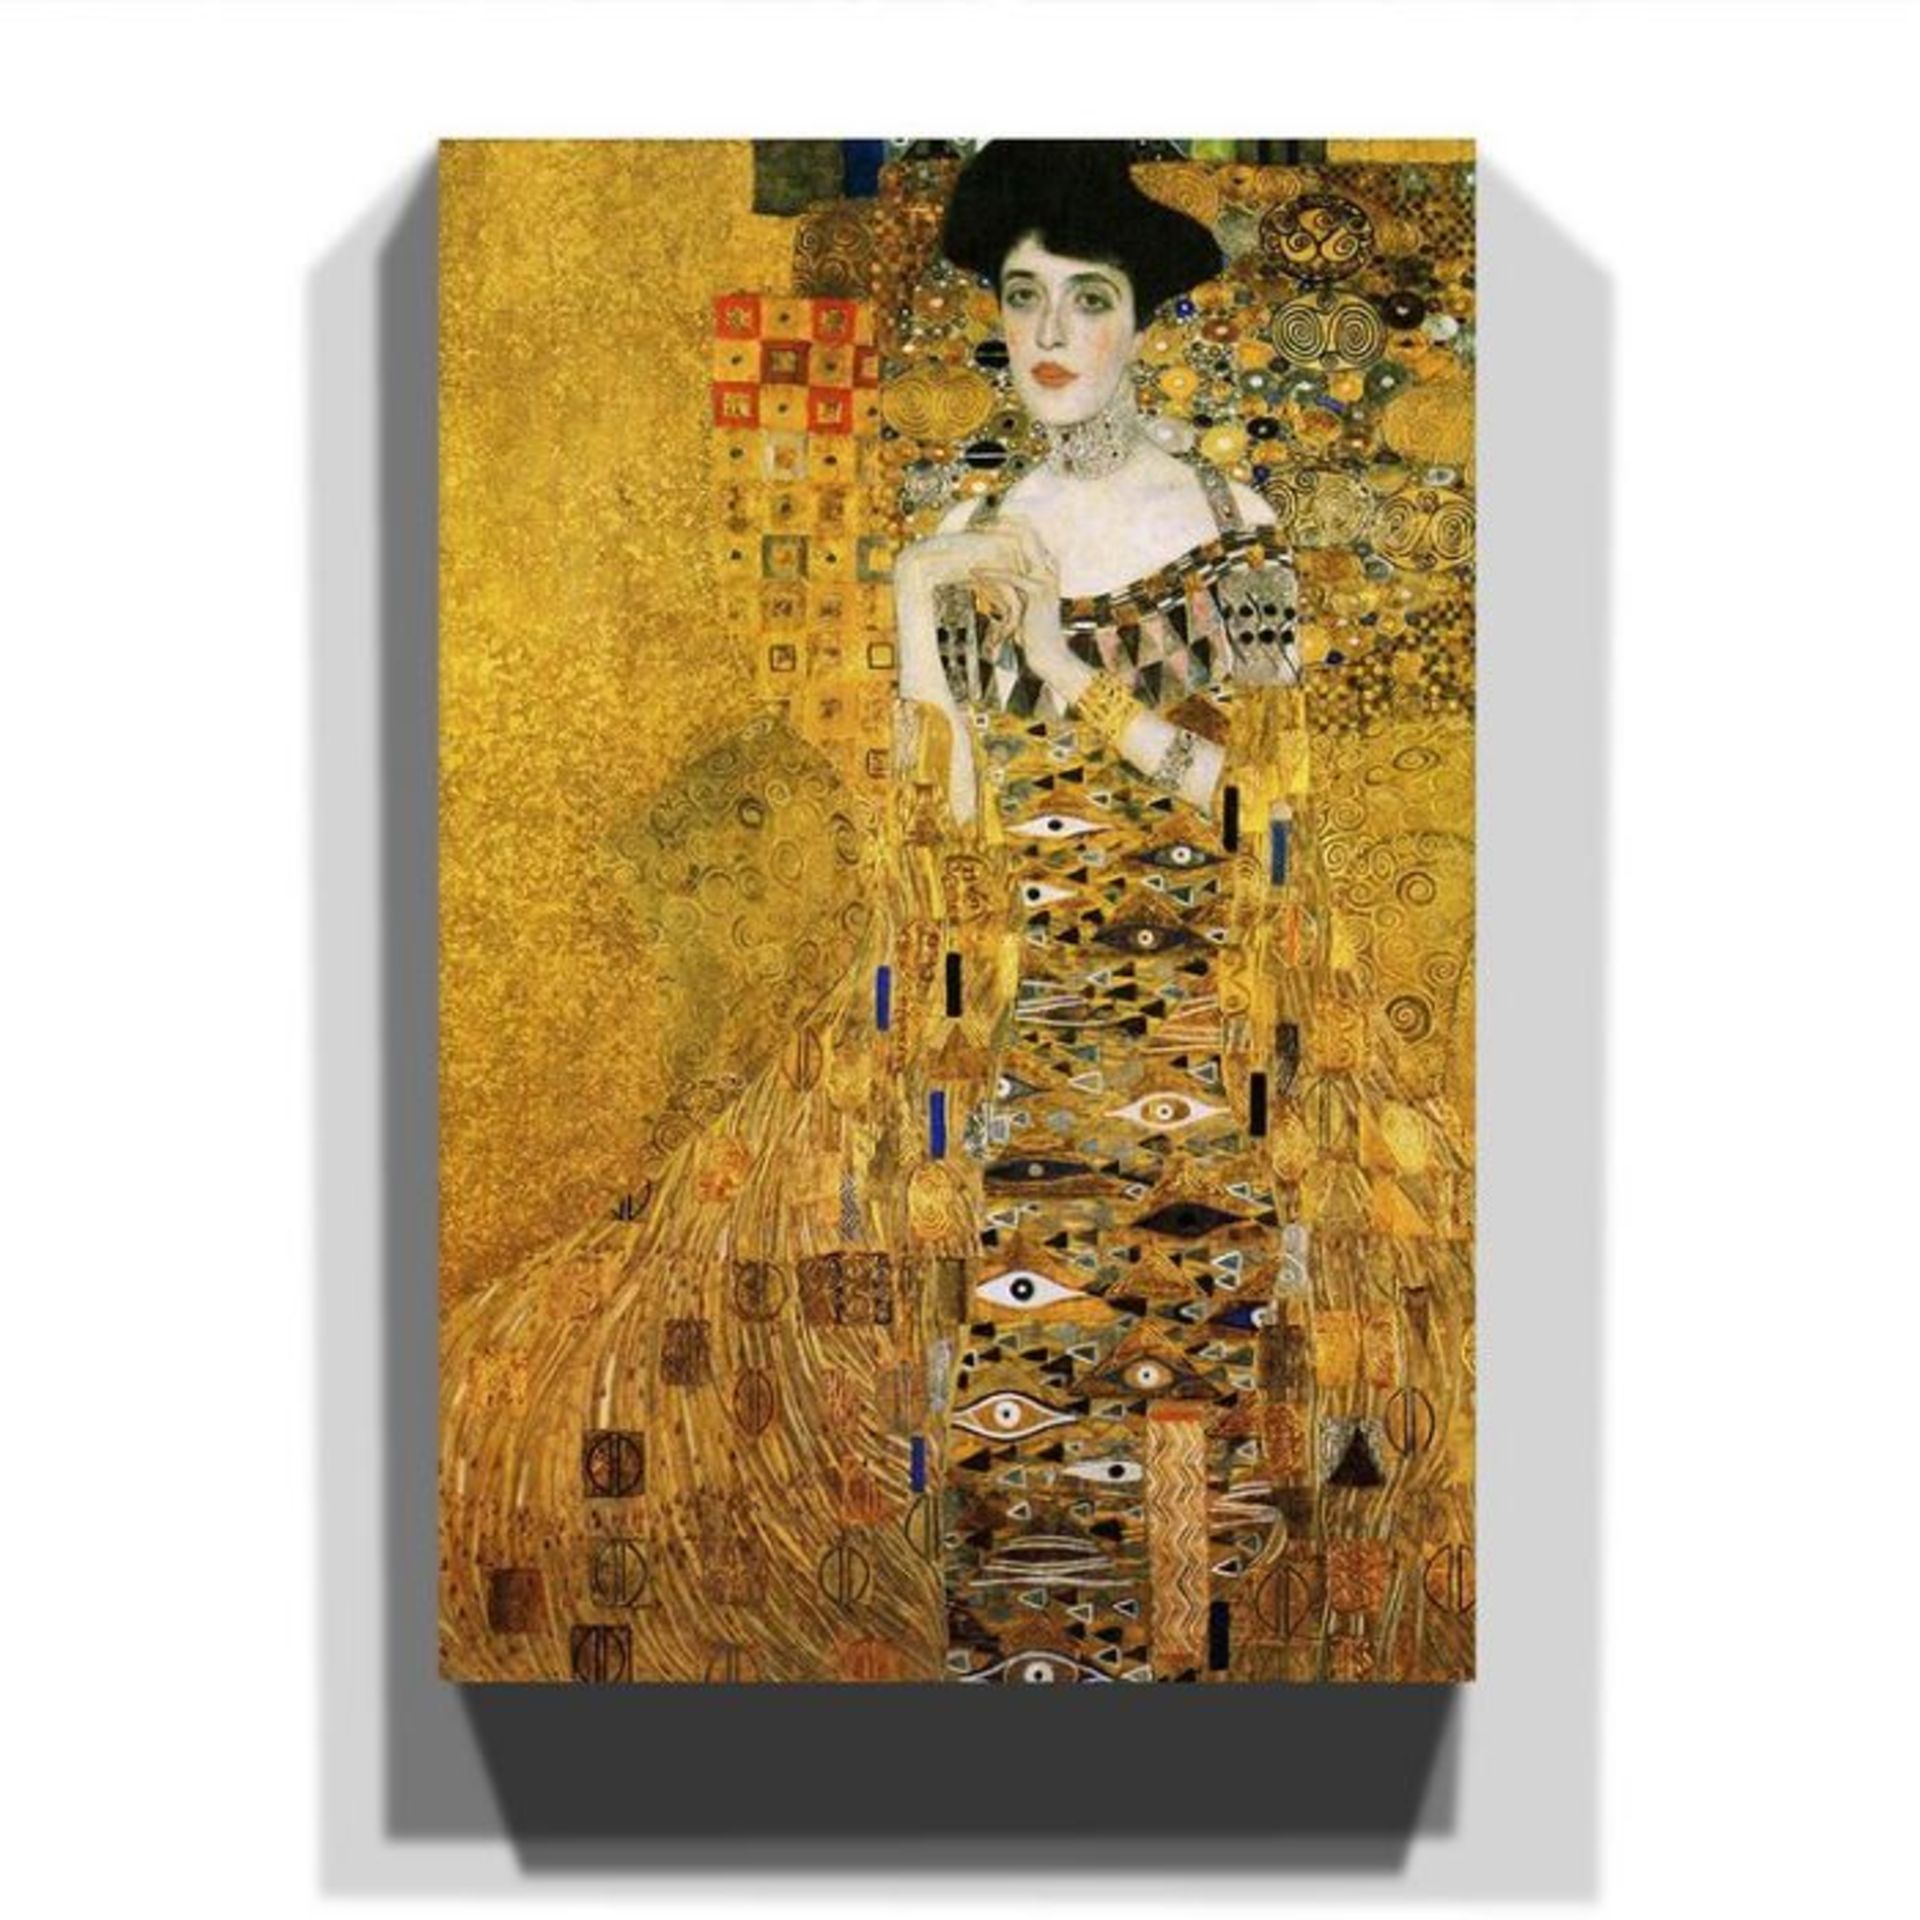 Portrait of Adele Bloch-Bauer 2' by Gustav Klimt - Wrapped Canvas Painting Print (ORANGE) RRP - £ - Image 2 of 4